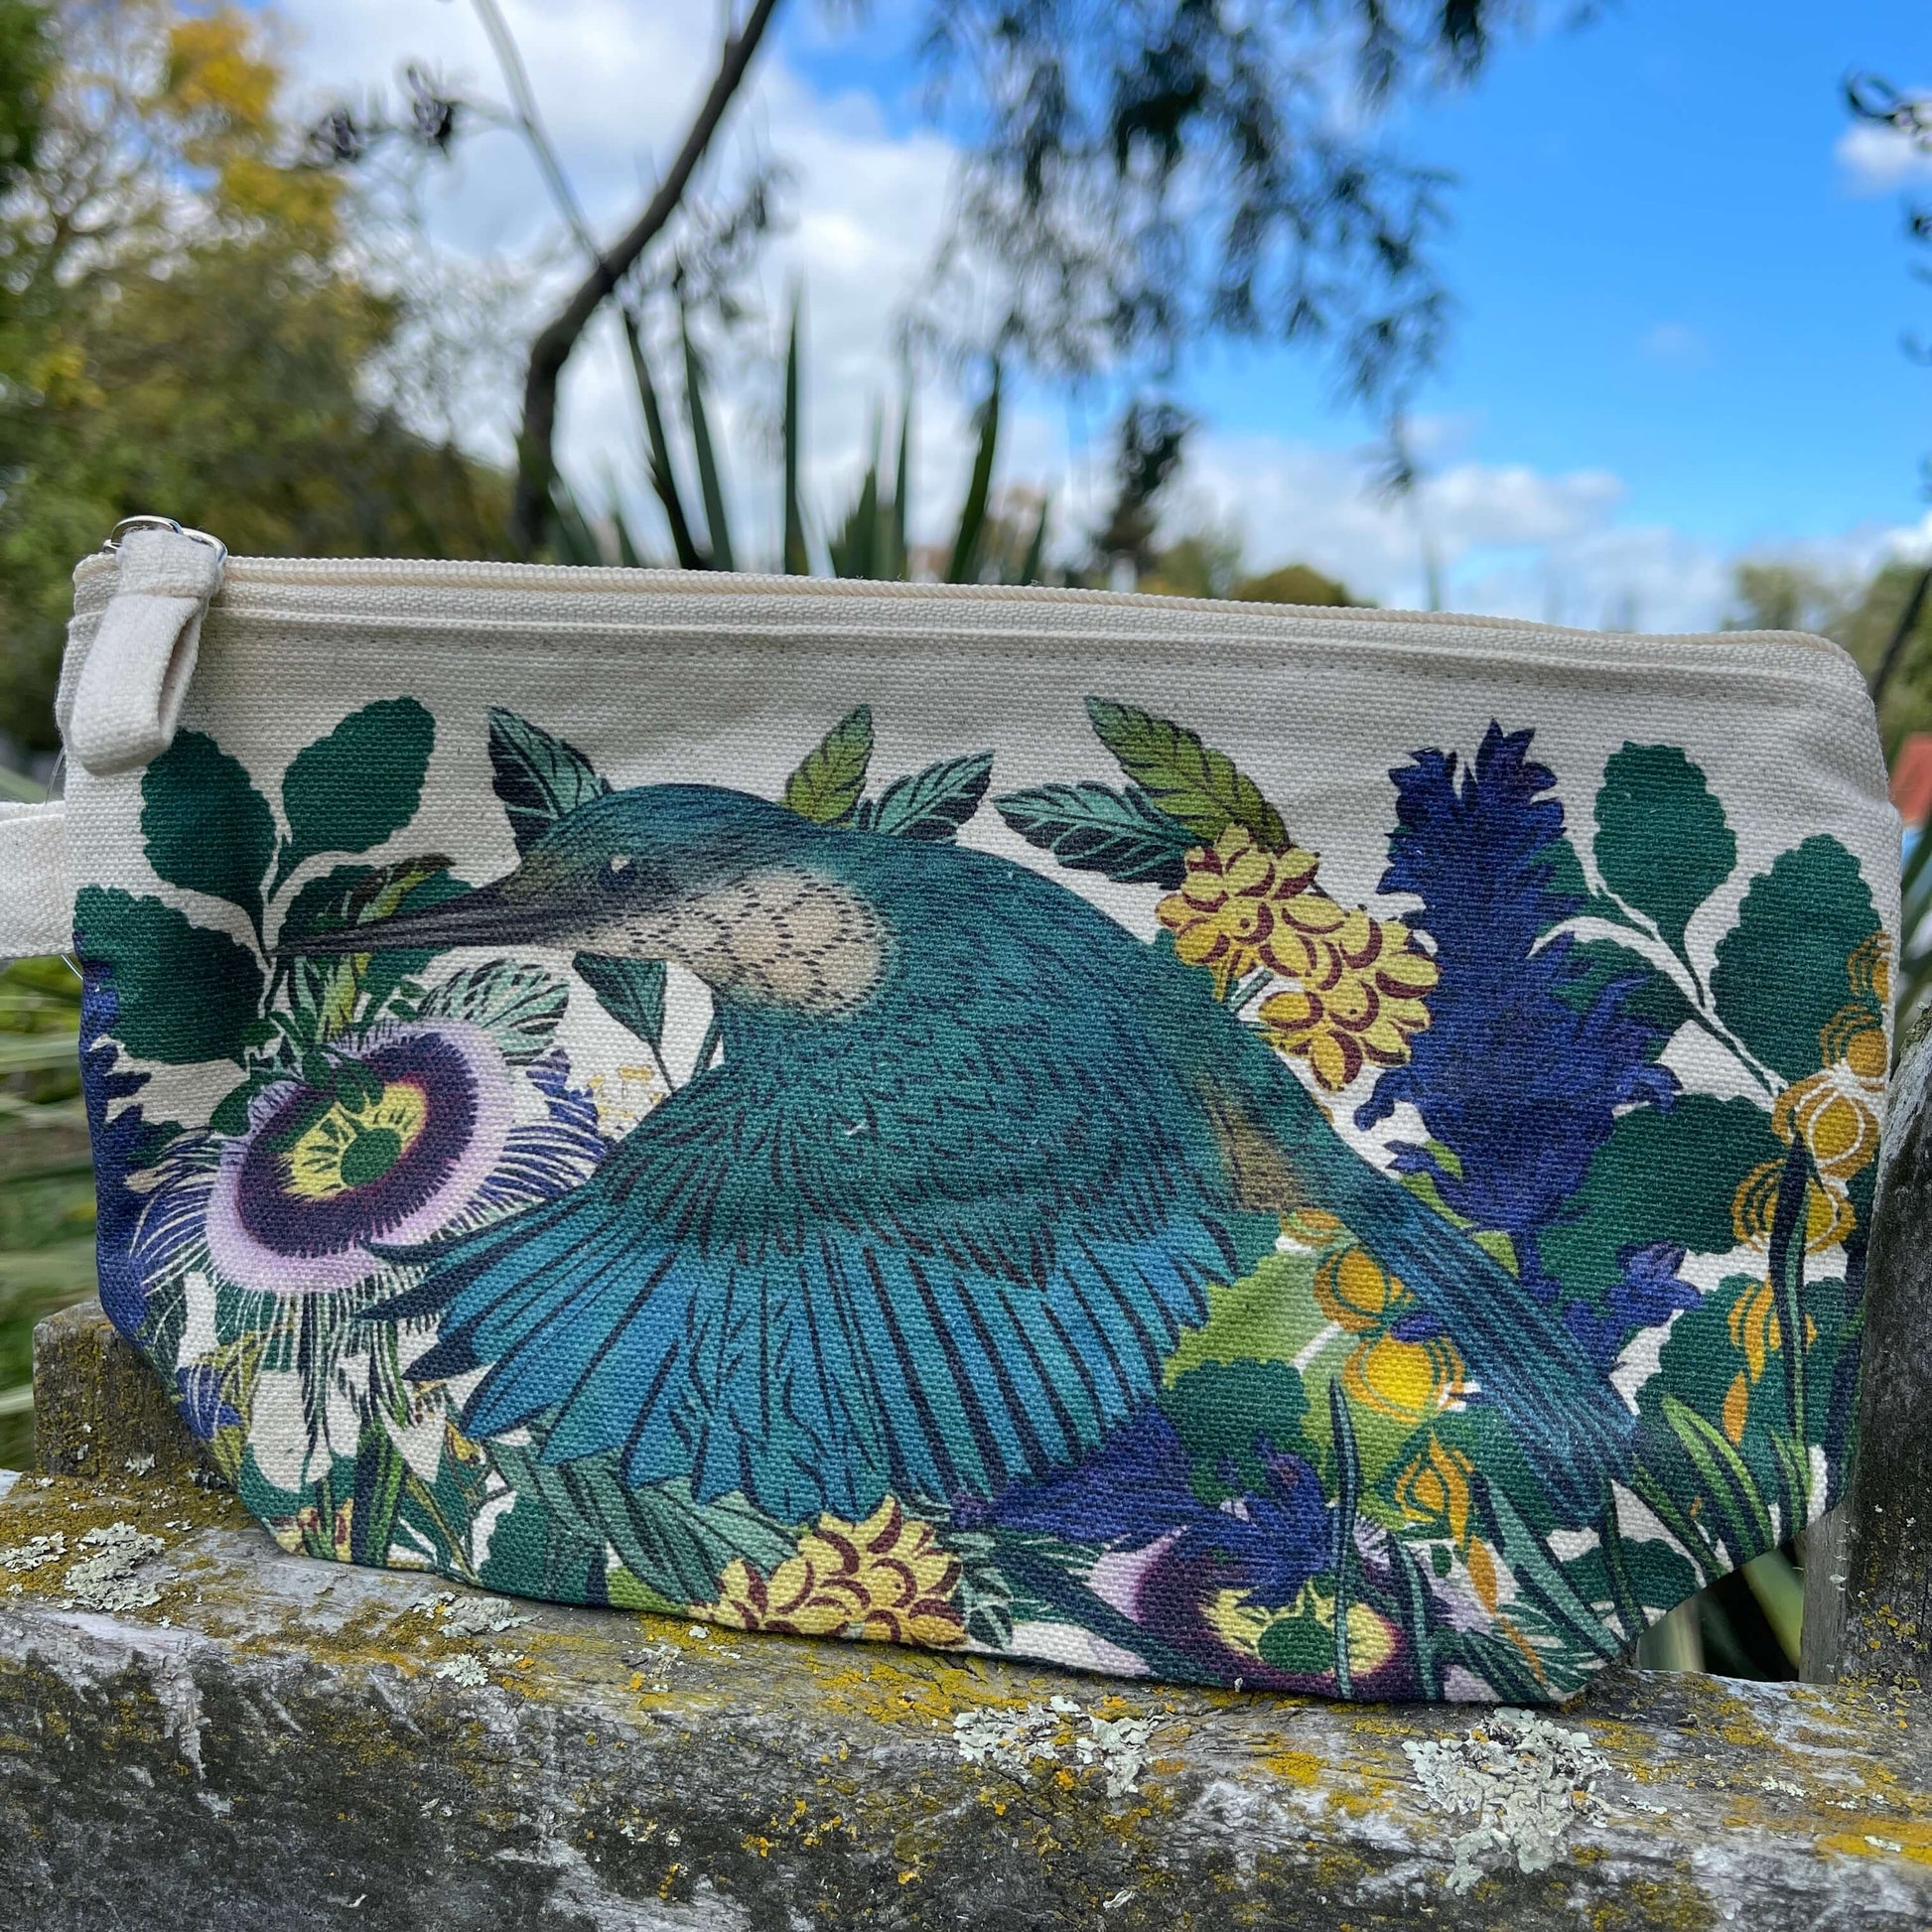 Vibrant kingfisher print on a cotton clutch purse.